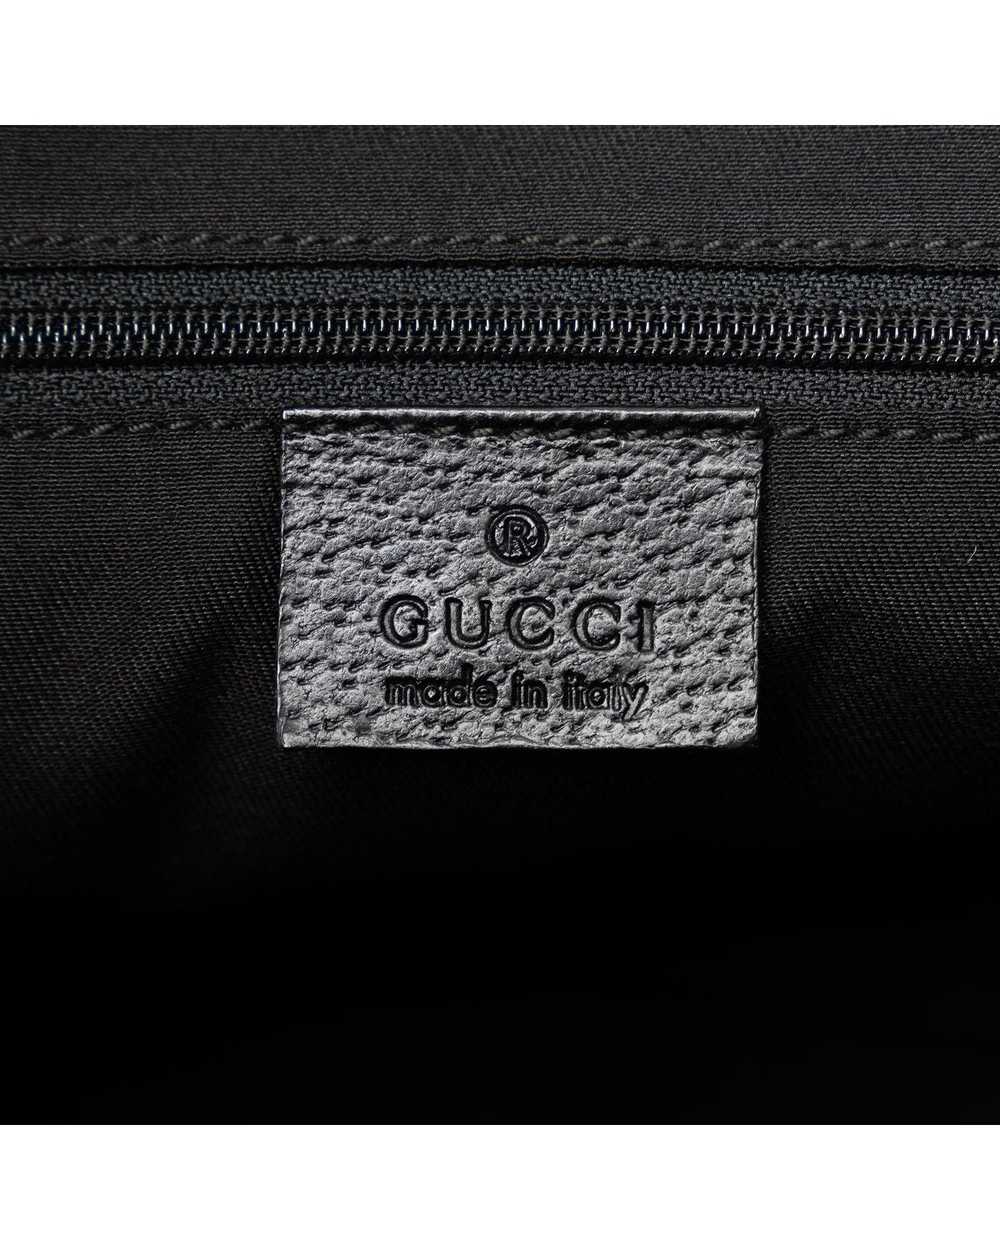 Gucci Canvas Shoulder Bag with Leather Trim and M… - image 6